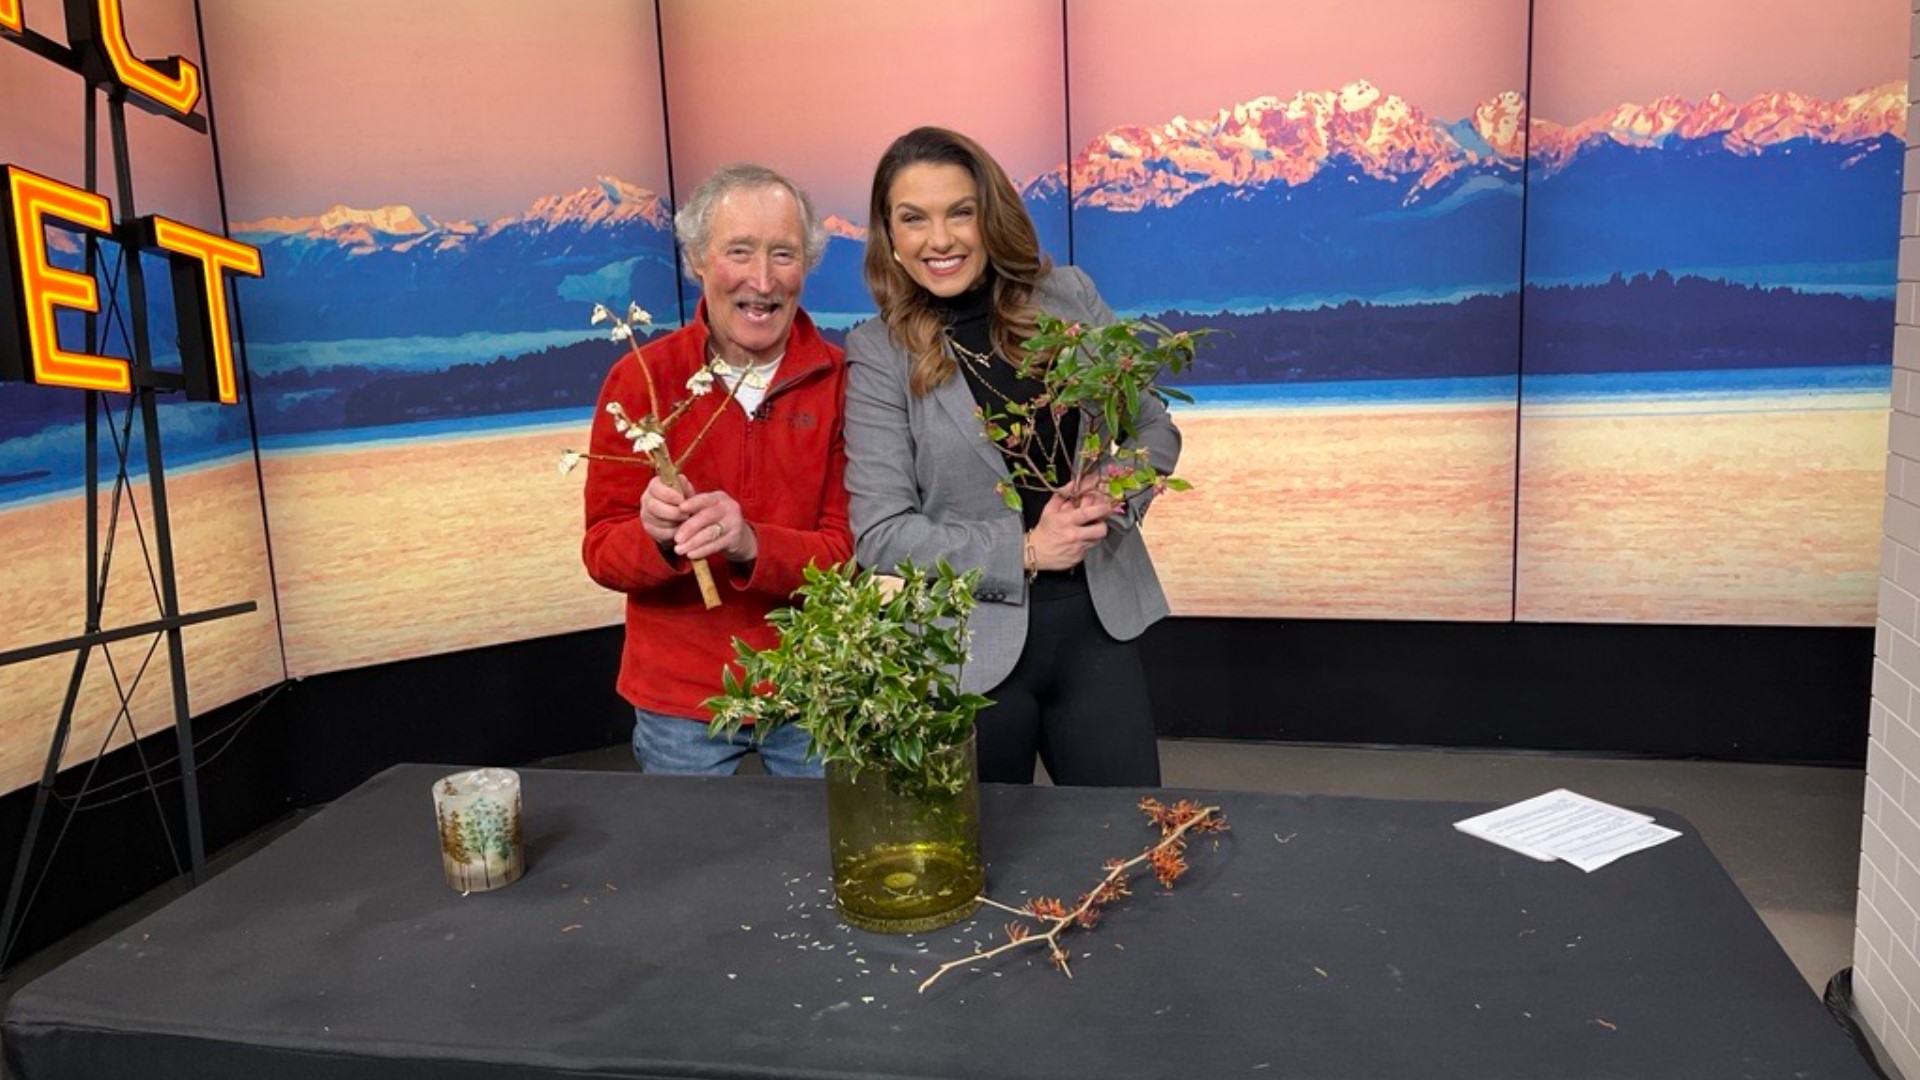 Ciscoe Morris says these plants will make your yard smell divine.